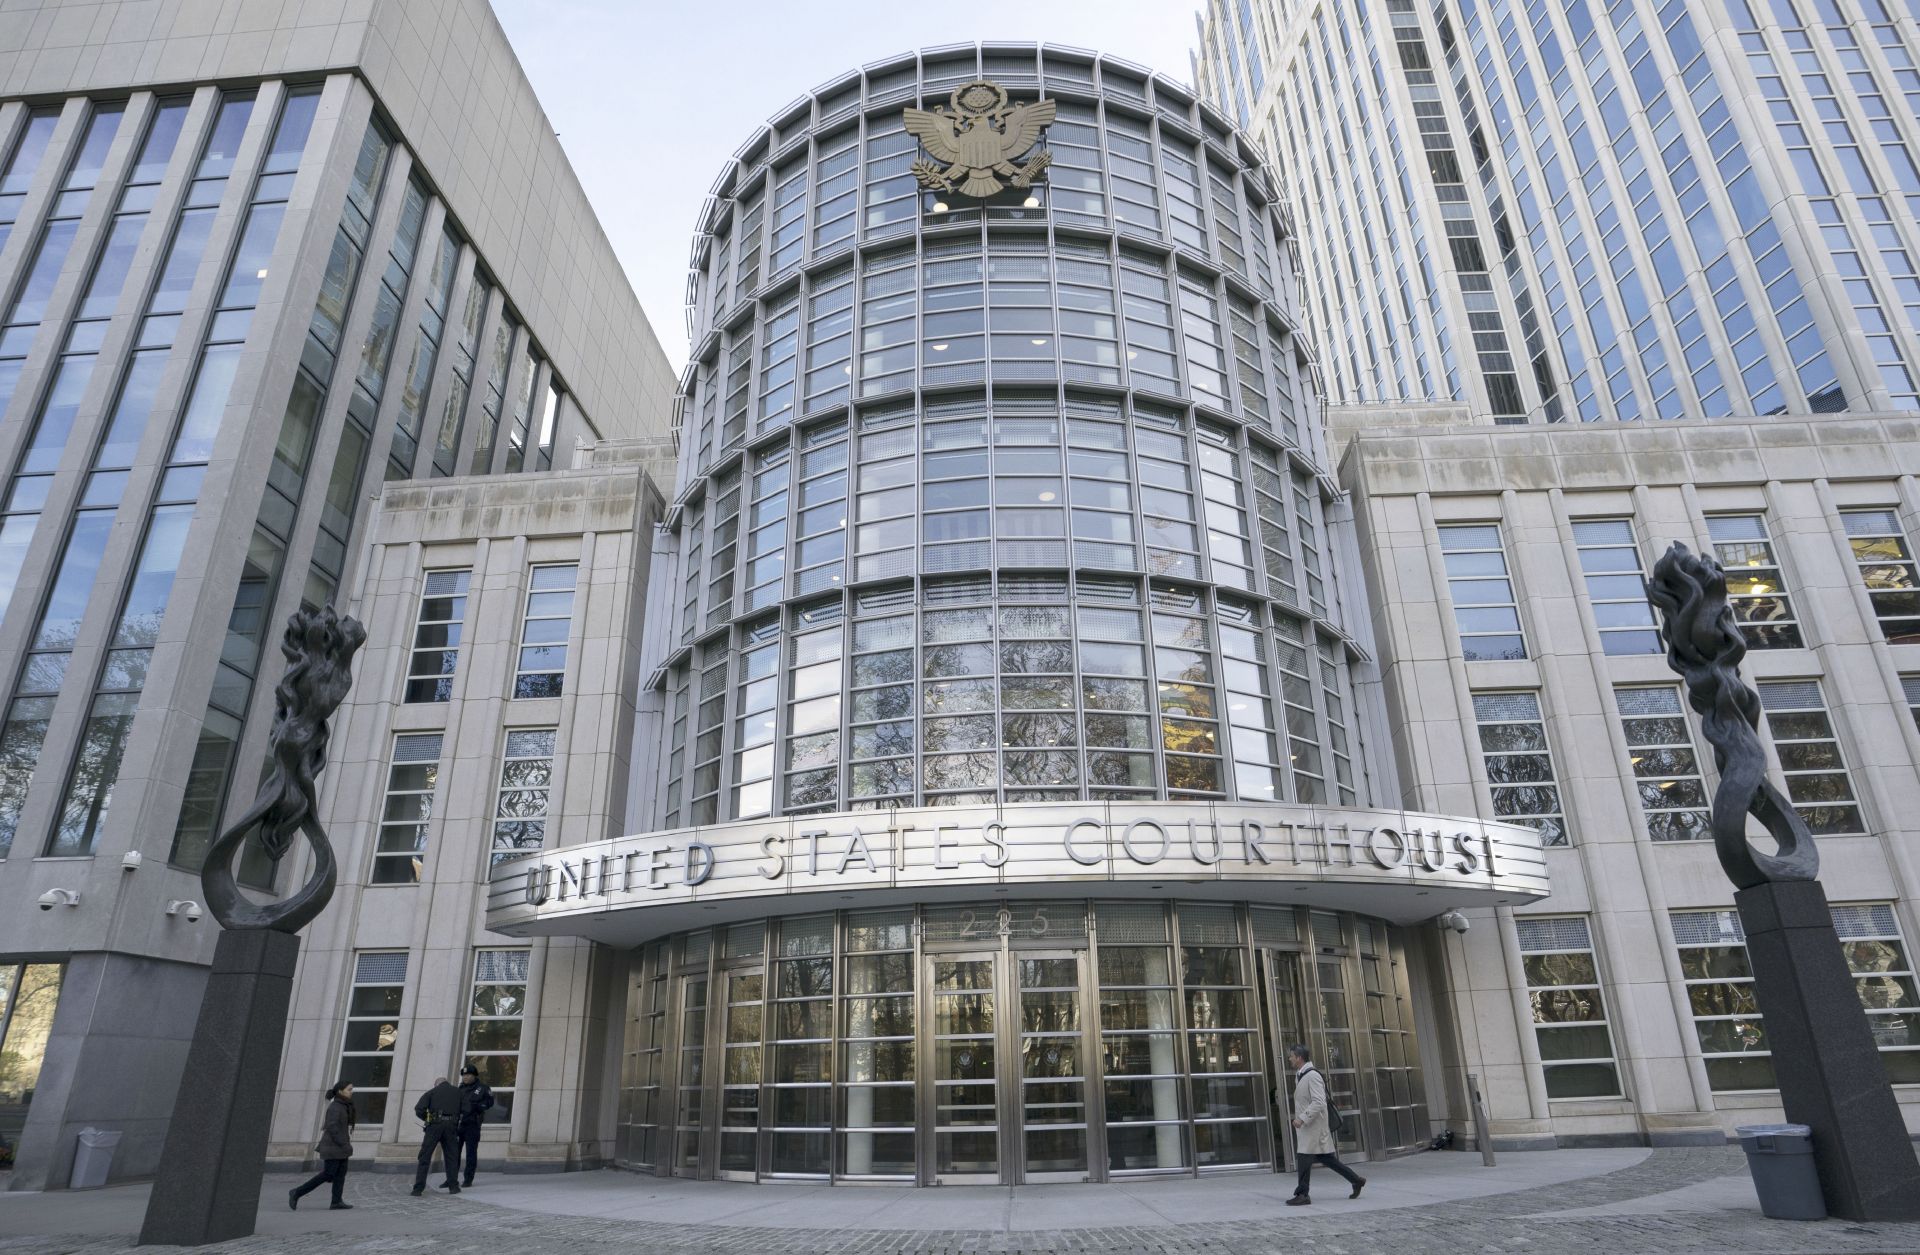 The Brooklyn Federal Courthouse is viewed as the trial of Joaquin "El Chapo" Guzman takes place inside on Nov. 14, 2018 in New York.